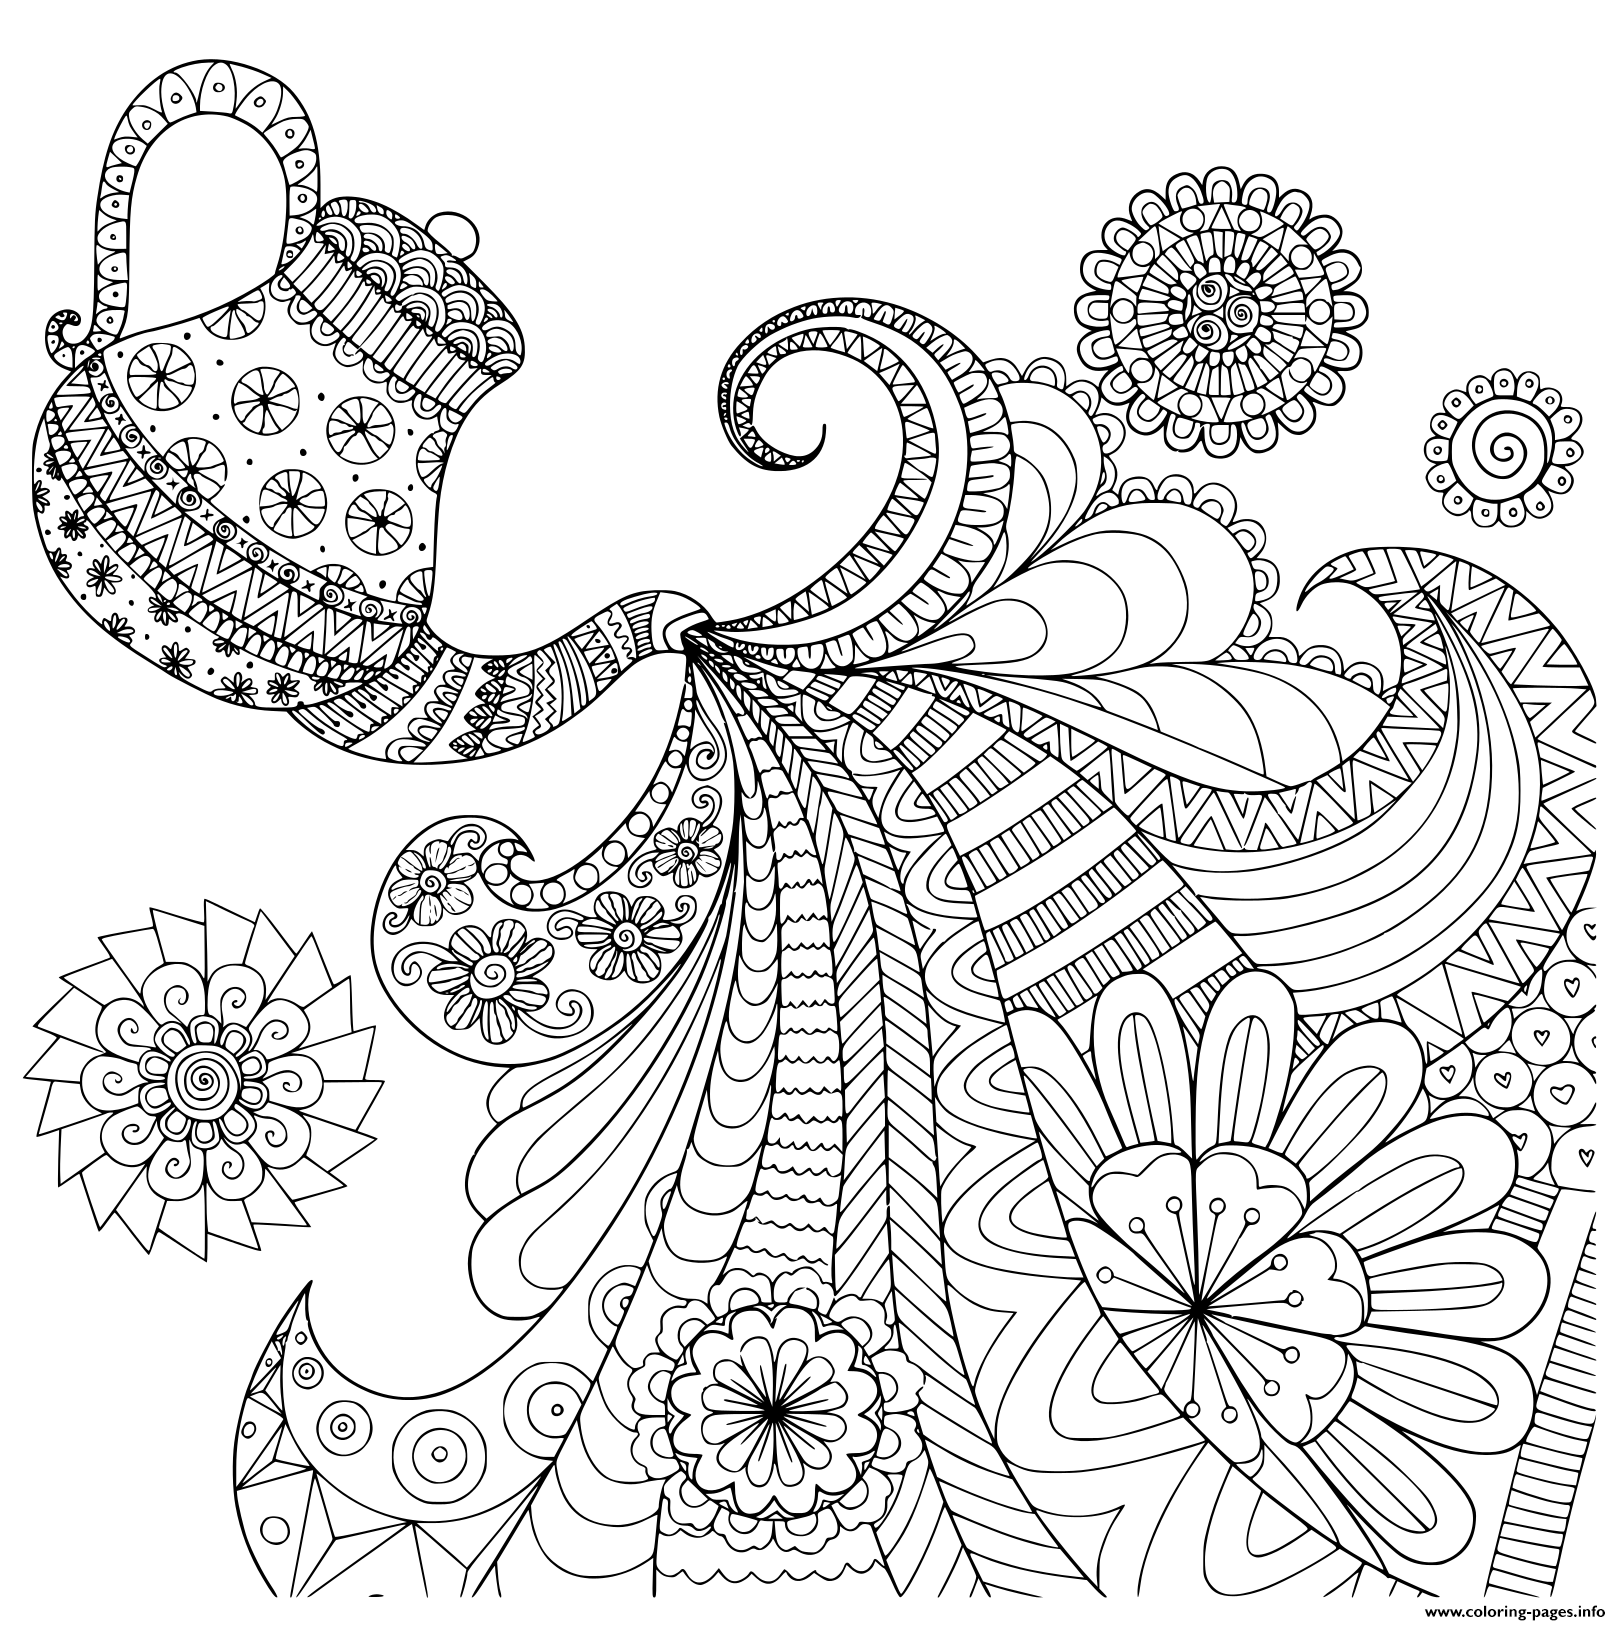 Line Design Of Tea To Adult coloring